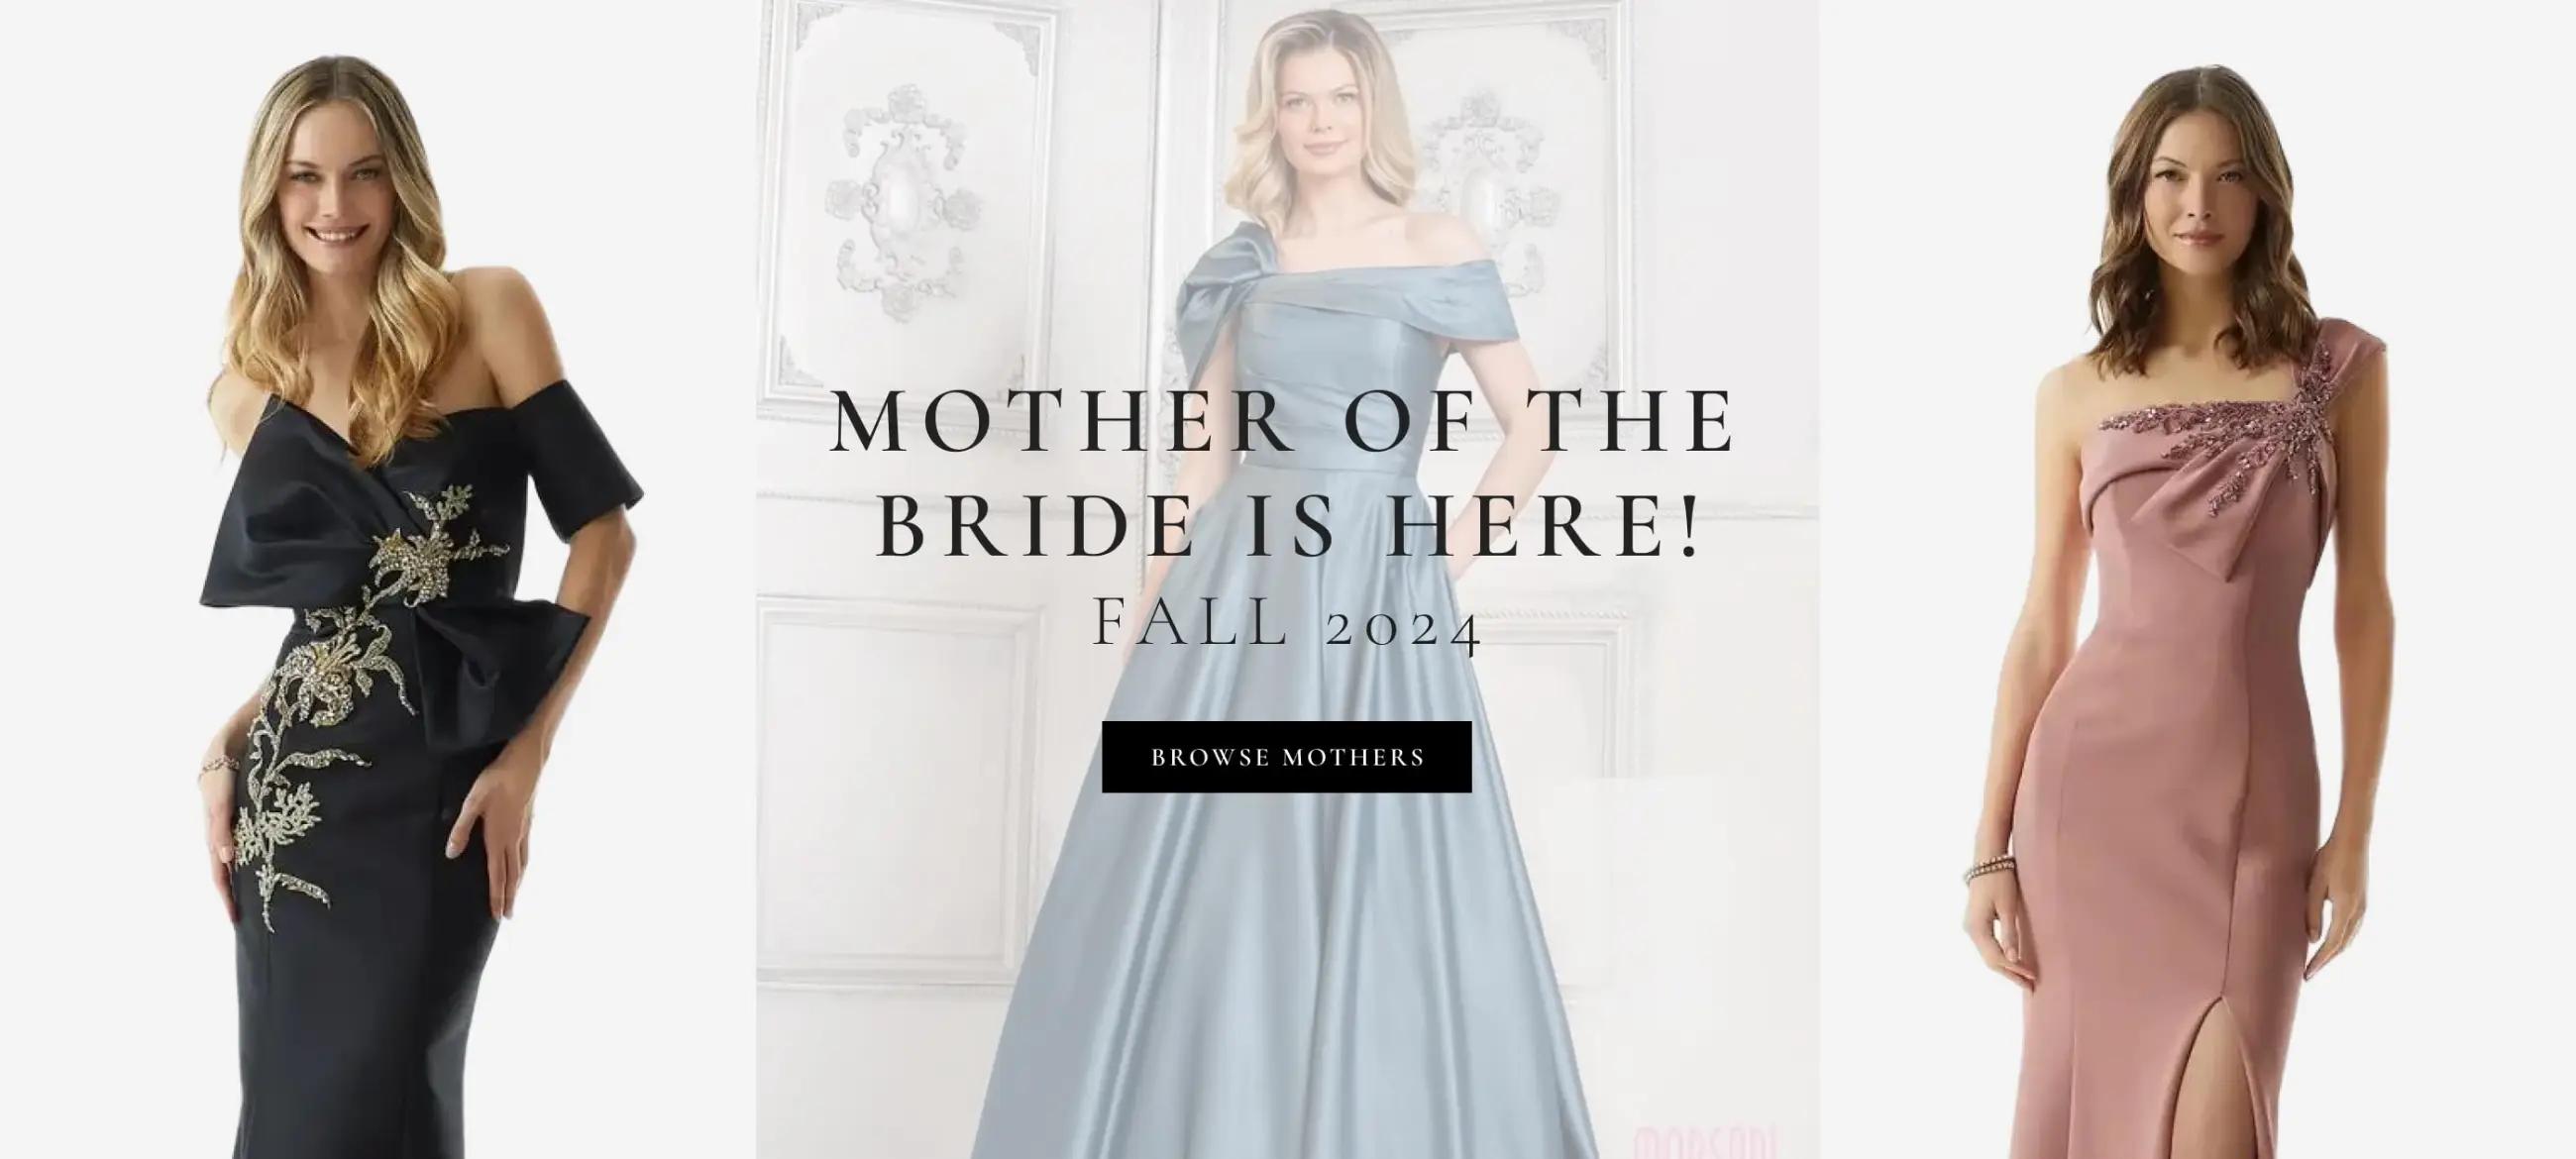 Desktop Mother of the Bride is Here Fall 2024 Banner